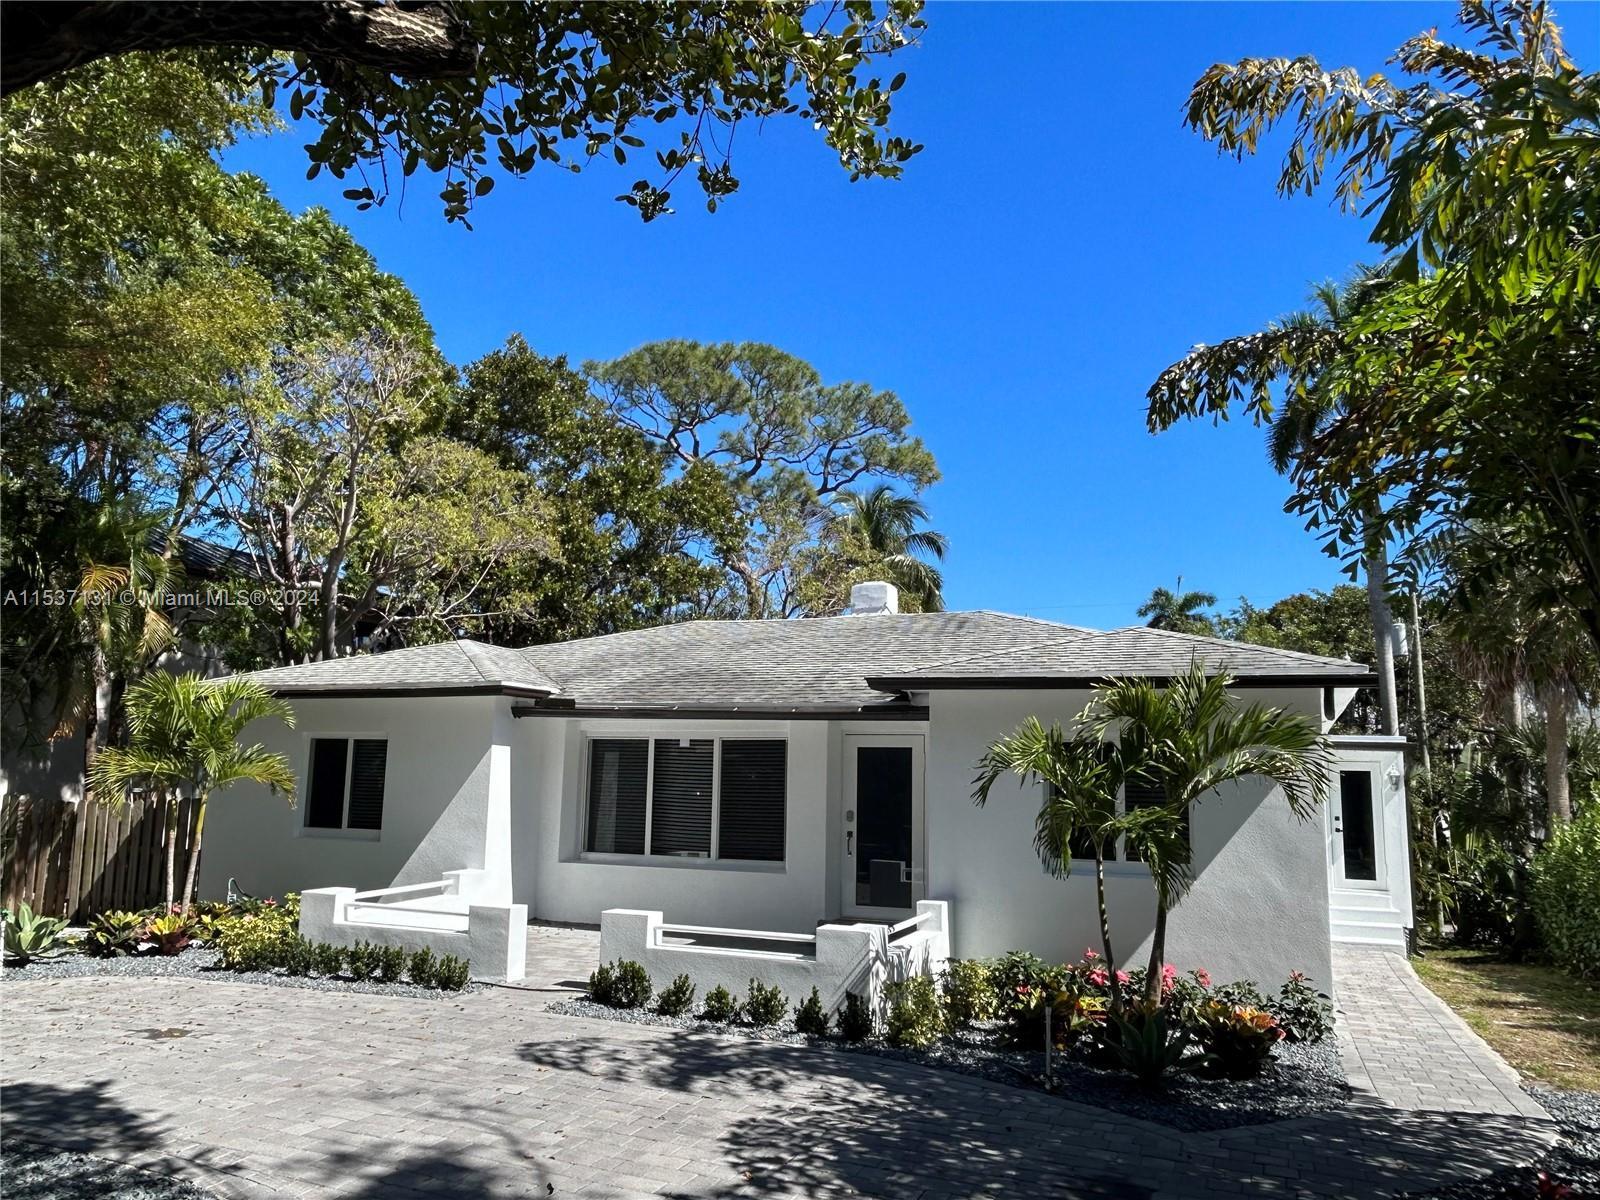 Photo of 454 N Victoria Park Rd in Fort Lauderdale, FL